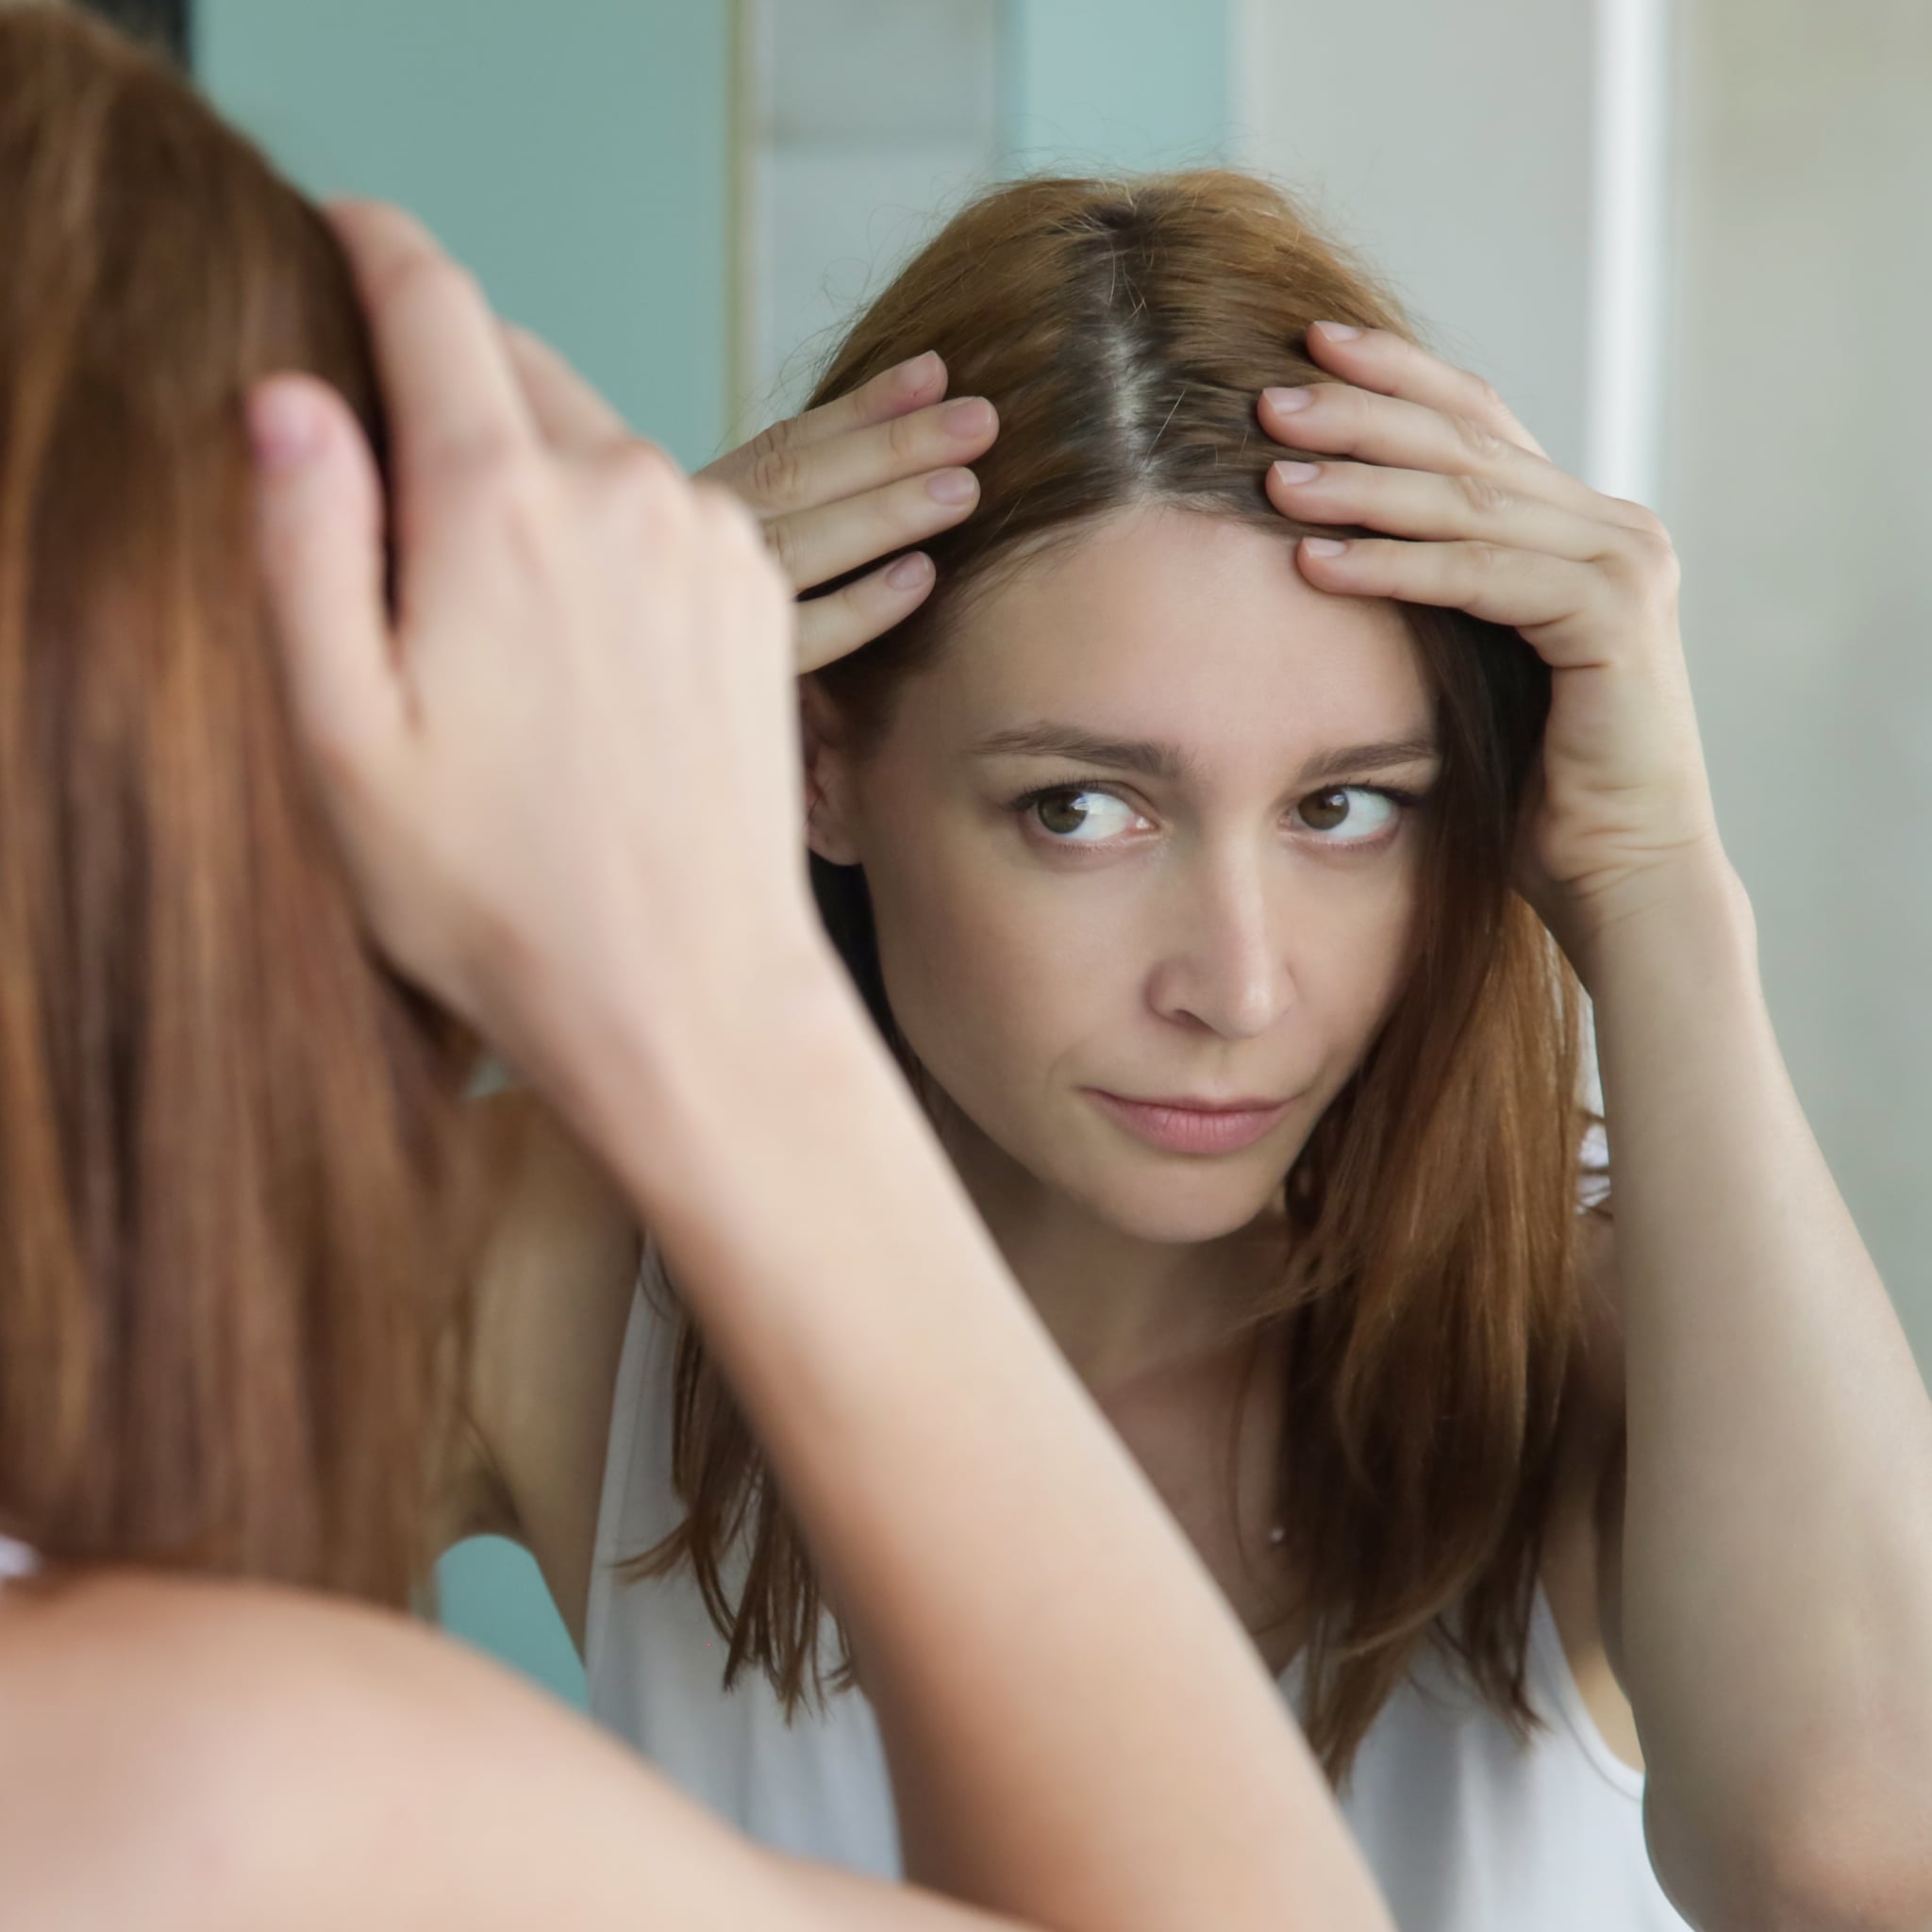 Common Causes of a Dry, Itchy Scalp | POPSUGAR Beauty